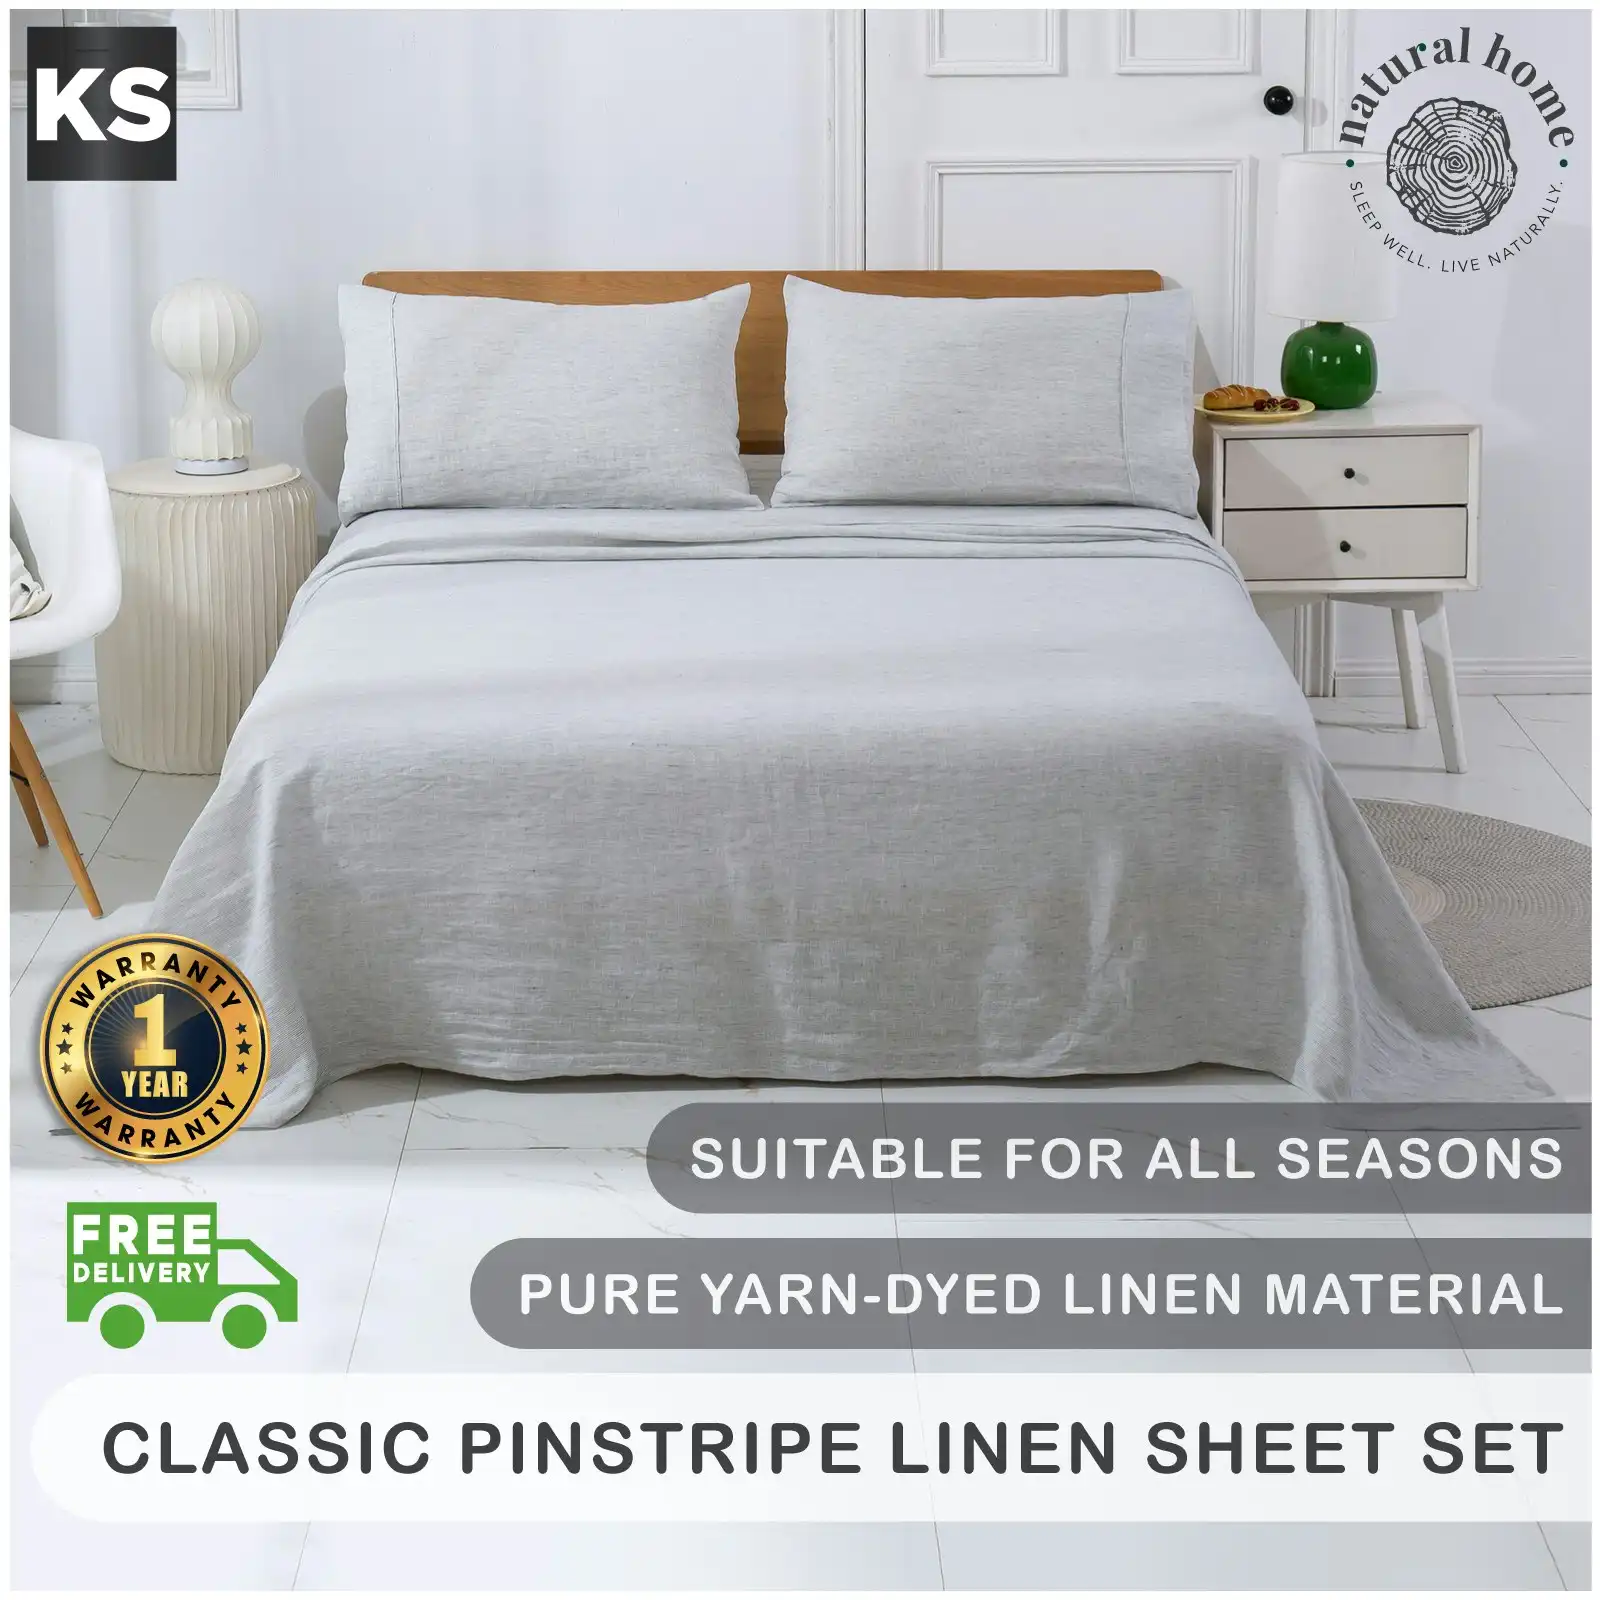 Natural Home Classic Pinstripe Linen Sheet Set White with Dark Pinstripe King Single Bed